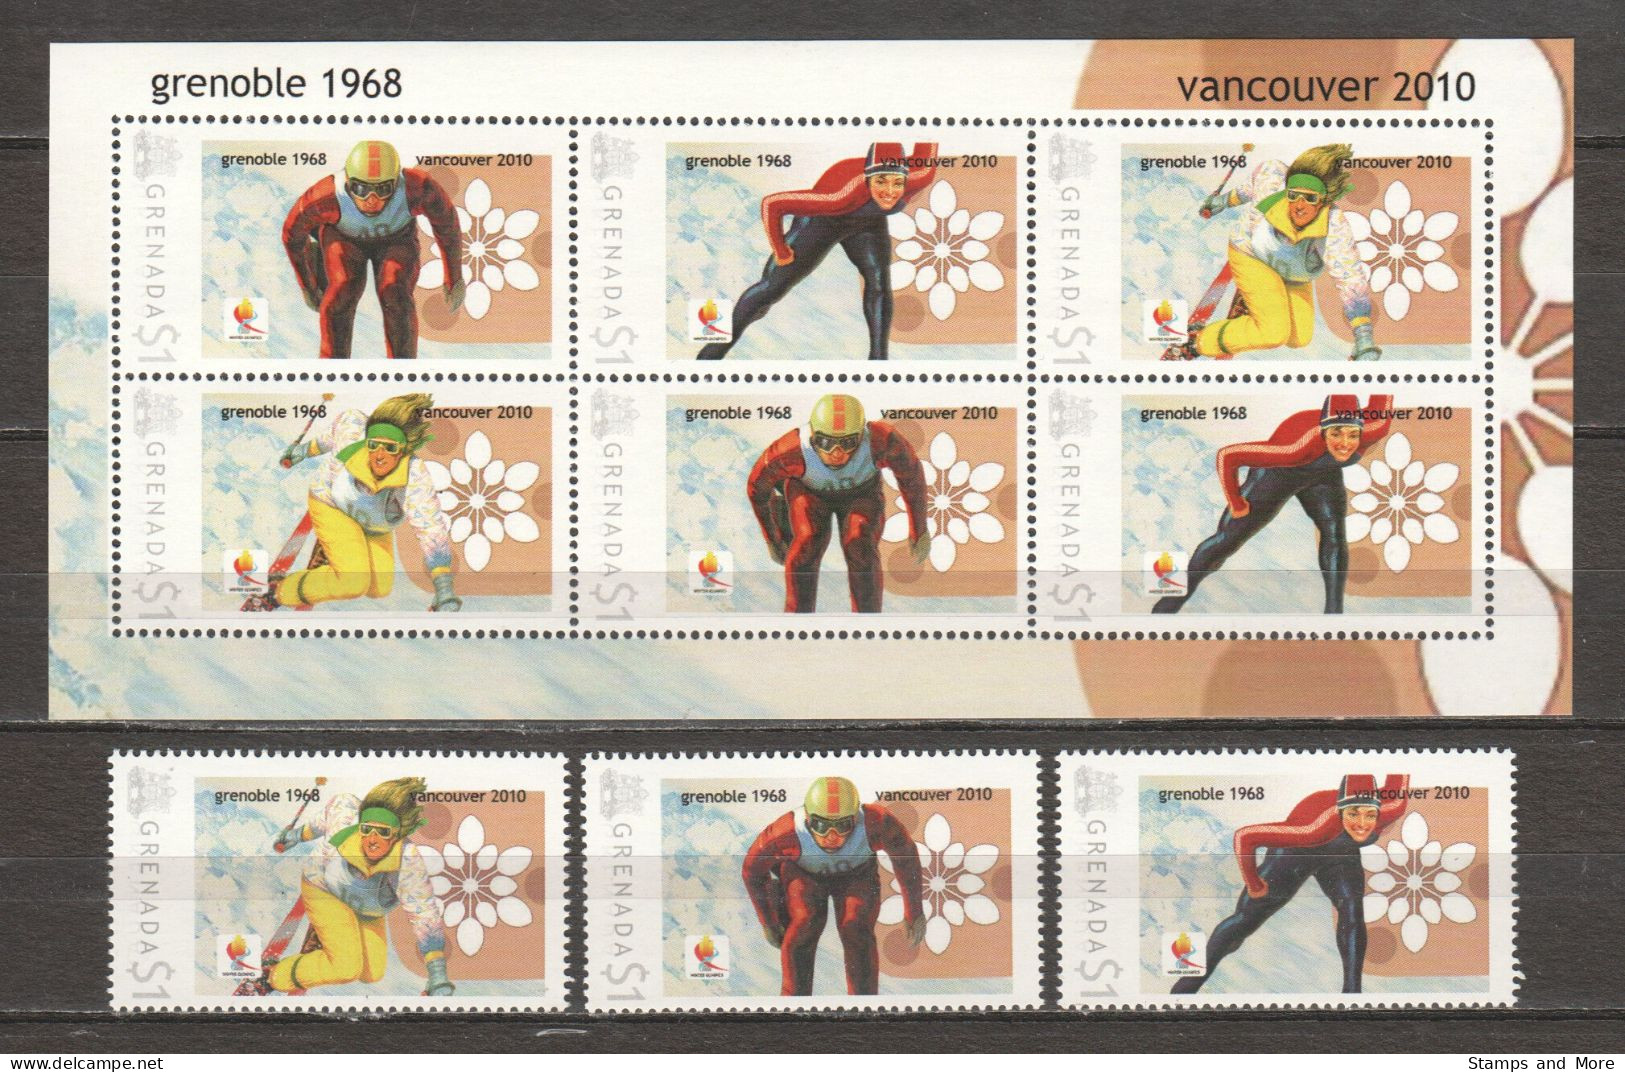 Grenada - Limited Edition Set 10 MNH - WINTER OLYMPICS VANCOUVER 2010 - GRENOBLE 1968 - Hiver 2010: Vancouver